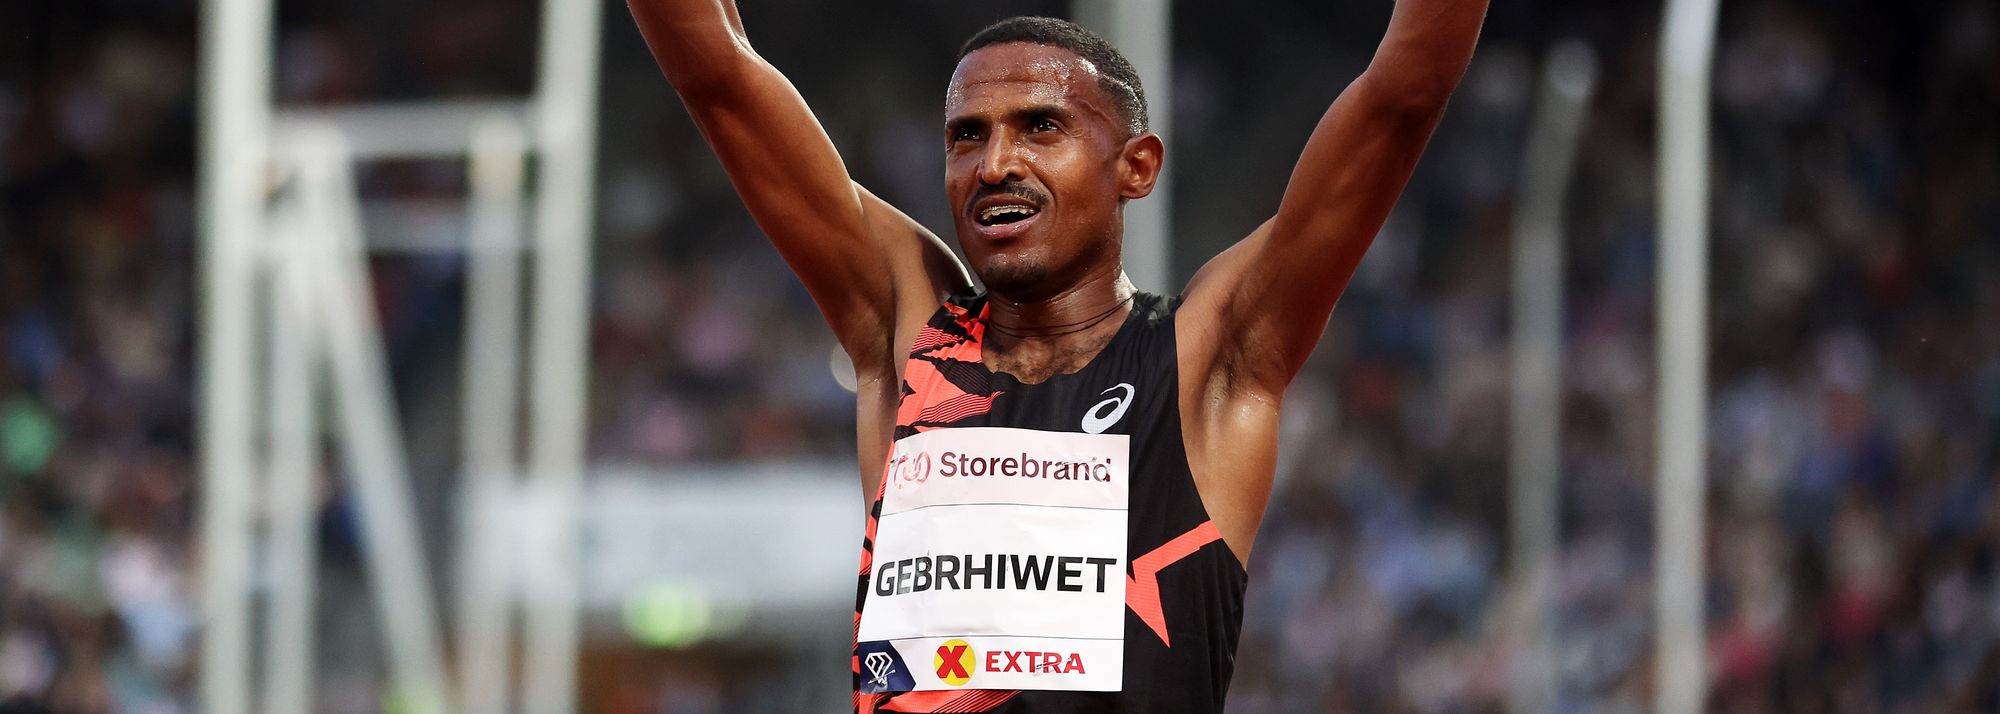 Hagos Gebrhiwet produced the standout performance of the Bislett Games